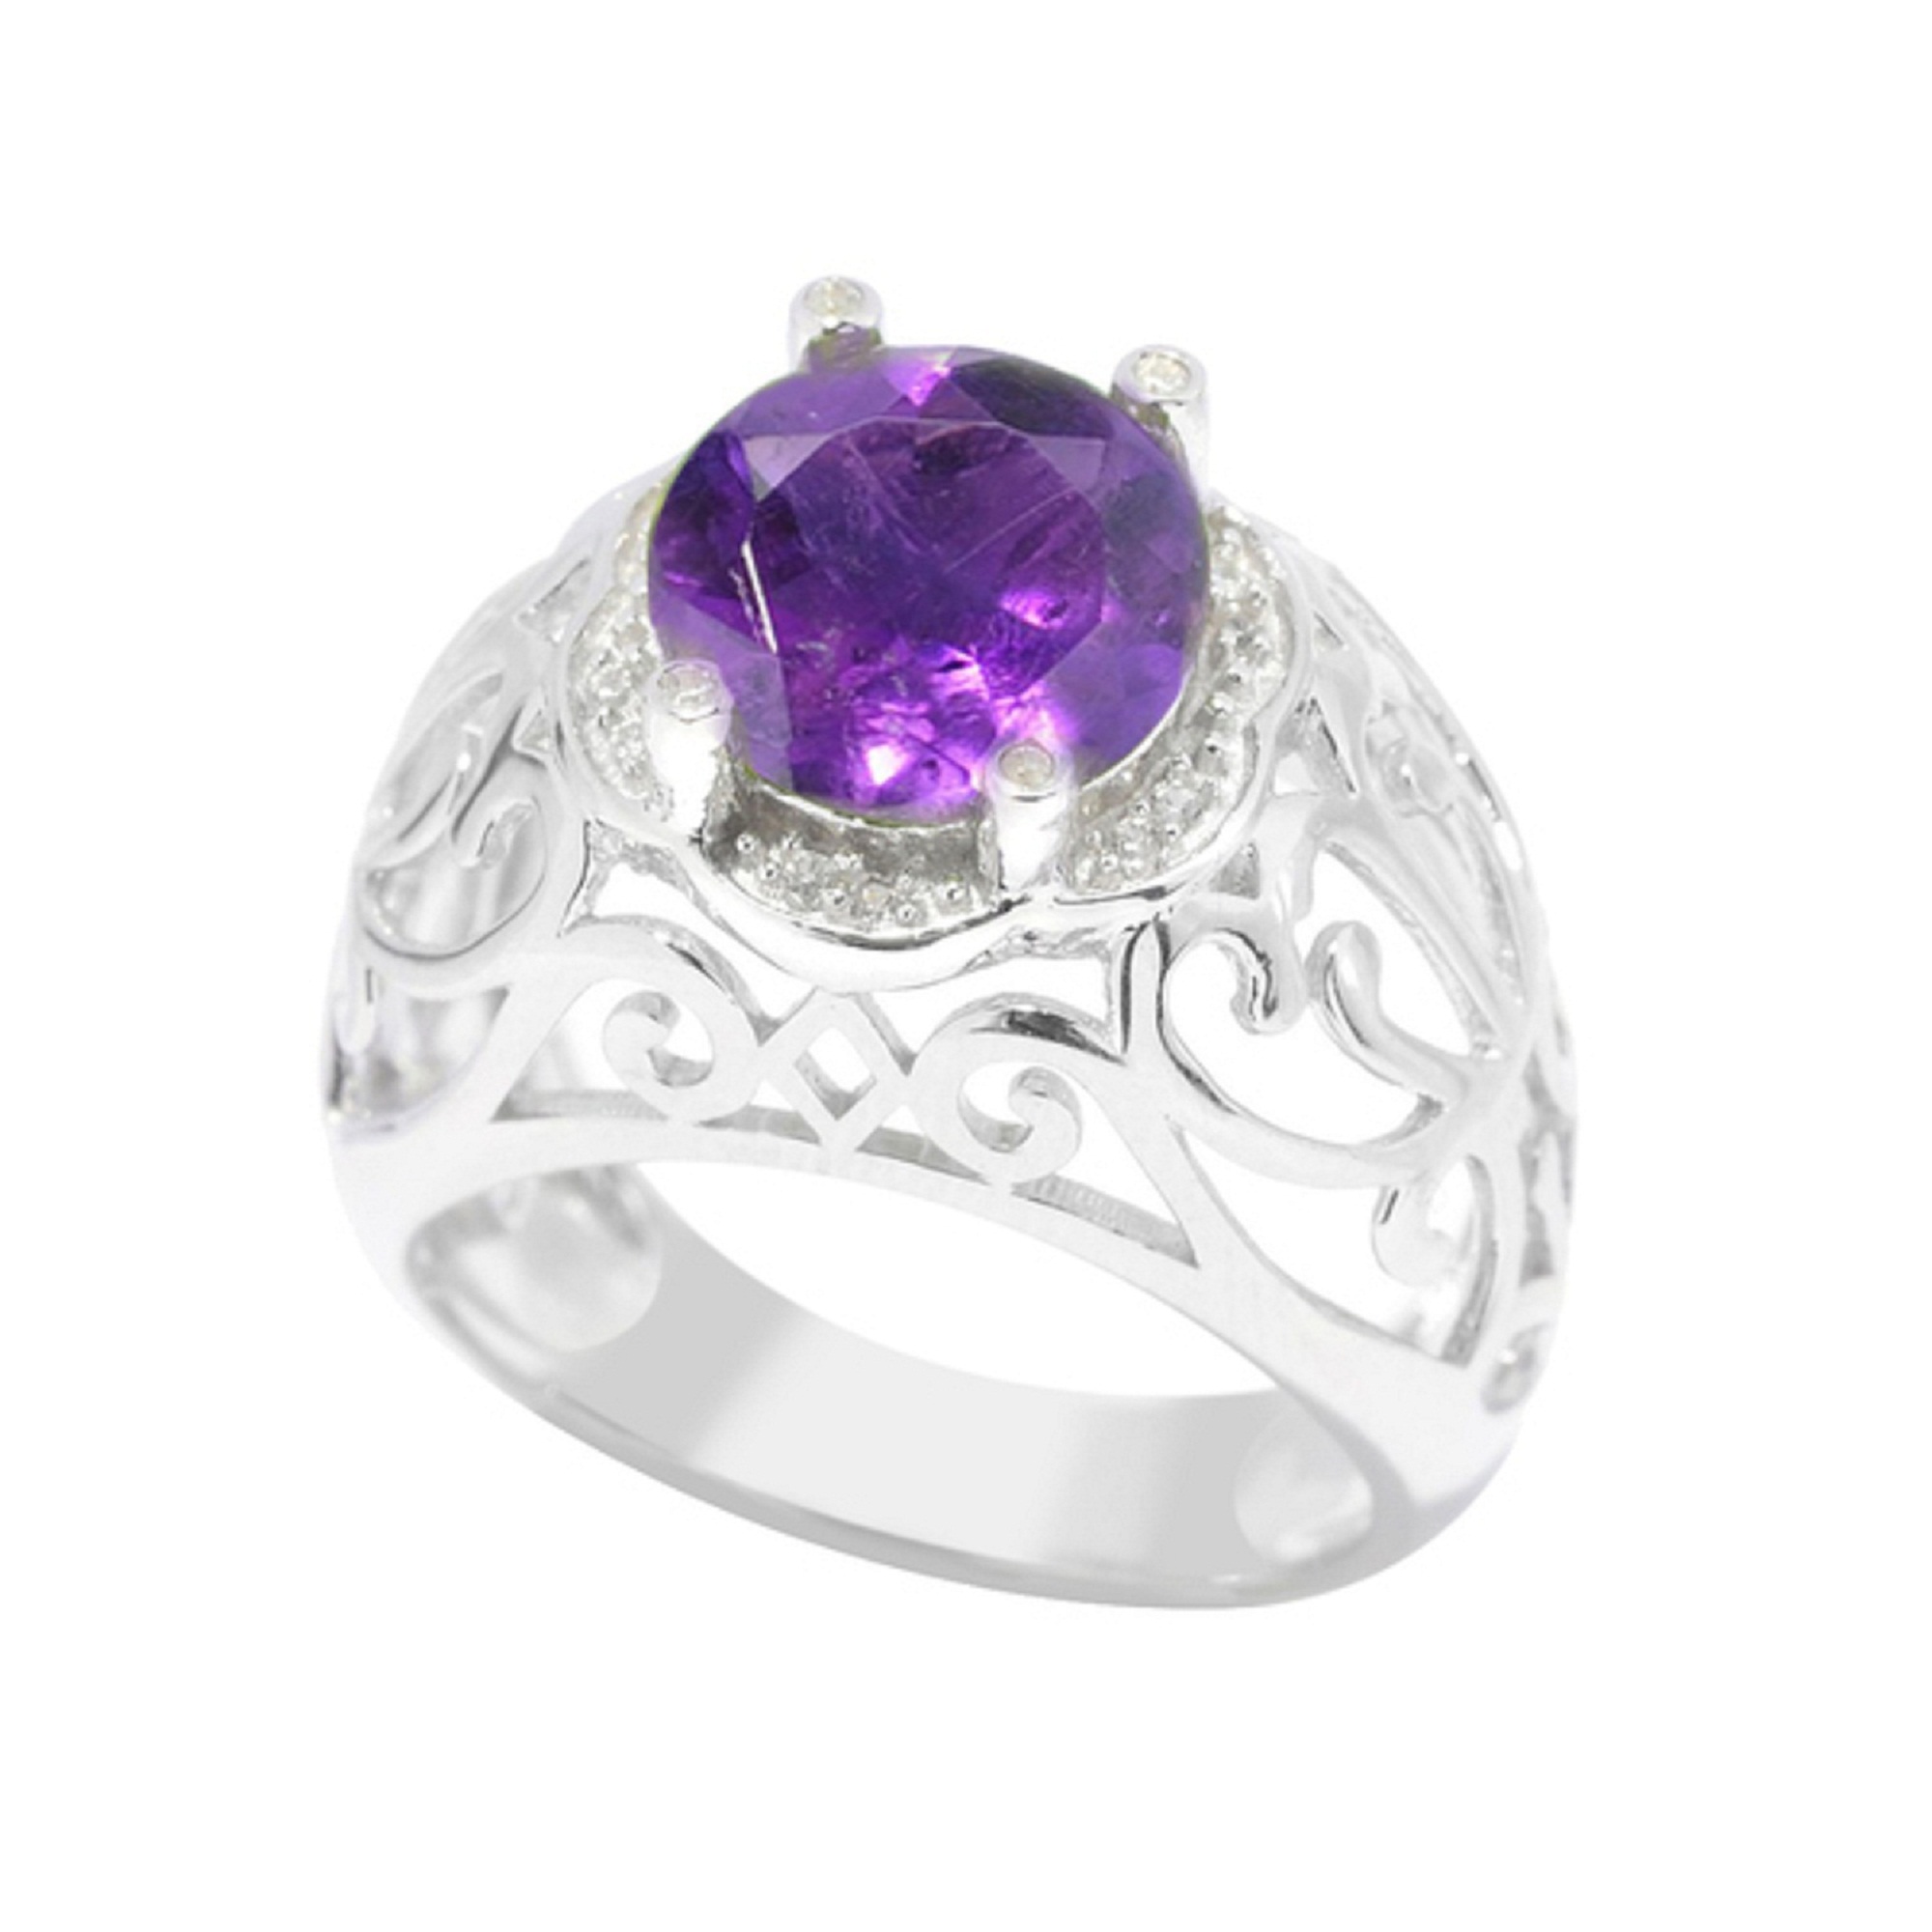 V3 Jewelry Sterling Silver 3.10ct Amethyst and White Zircon Halo Scrollwork Ring